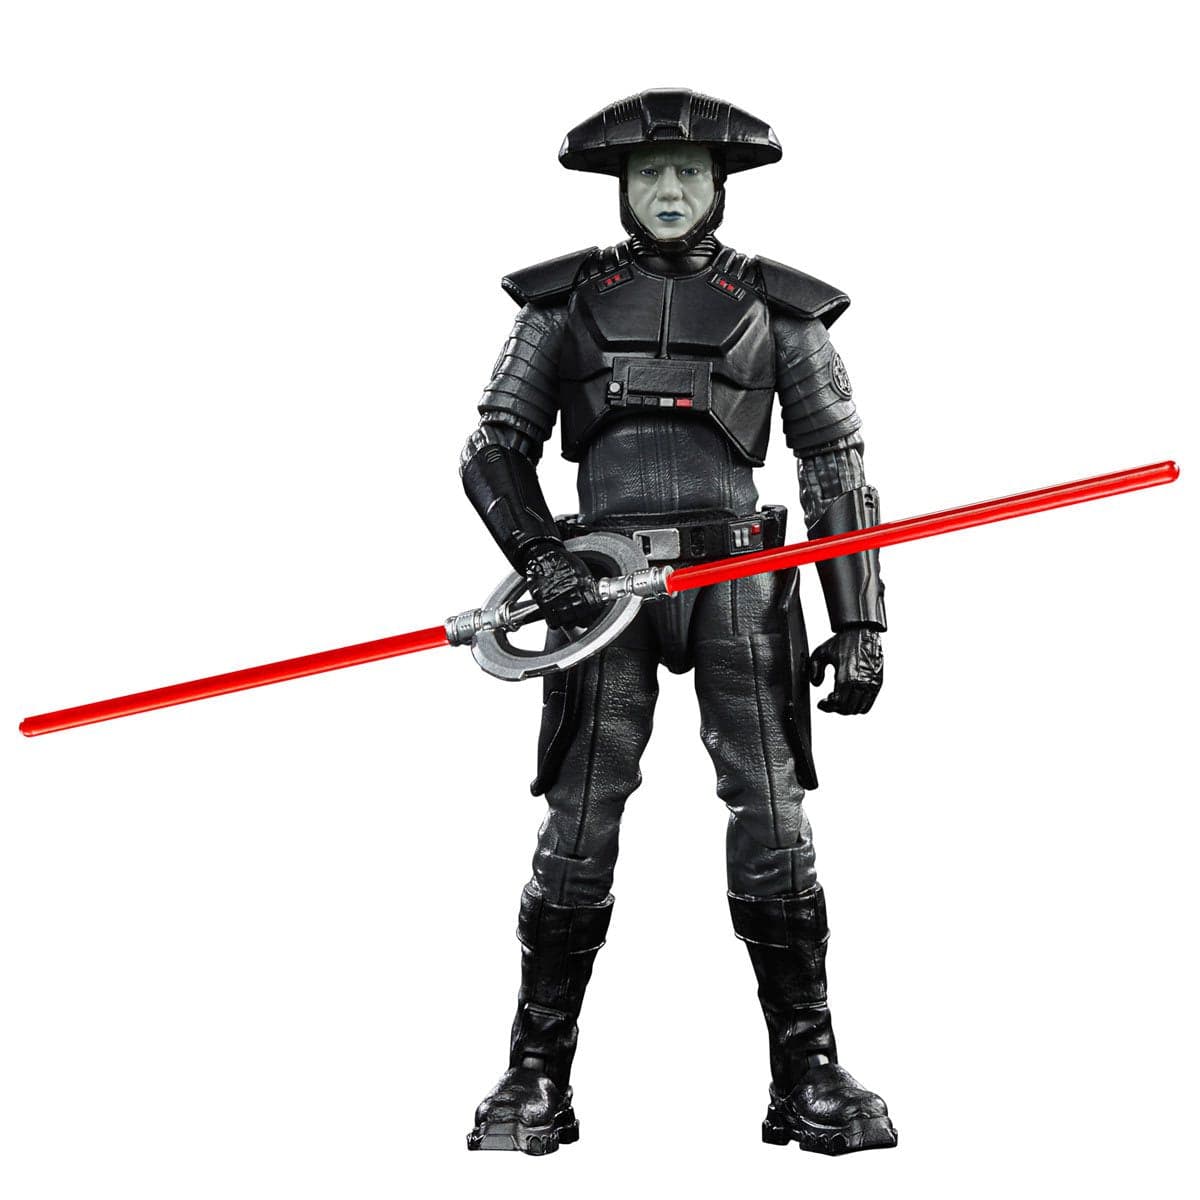 Star Wars The Black Series Fifth Brother (Inquisitor) 6-Inch Action Figure - Pop-O-Loco - Hasbro